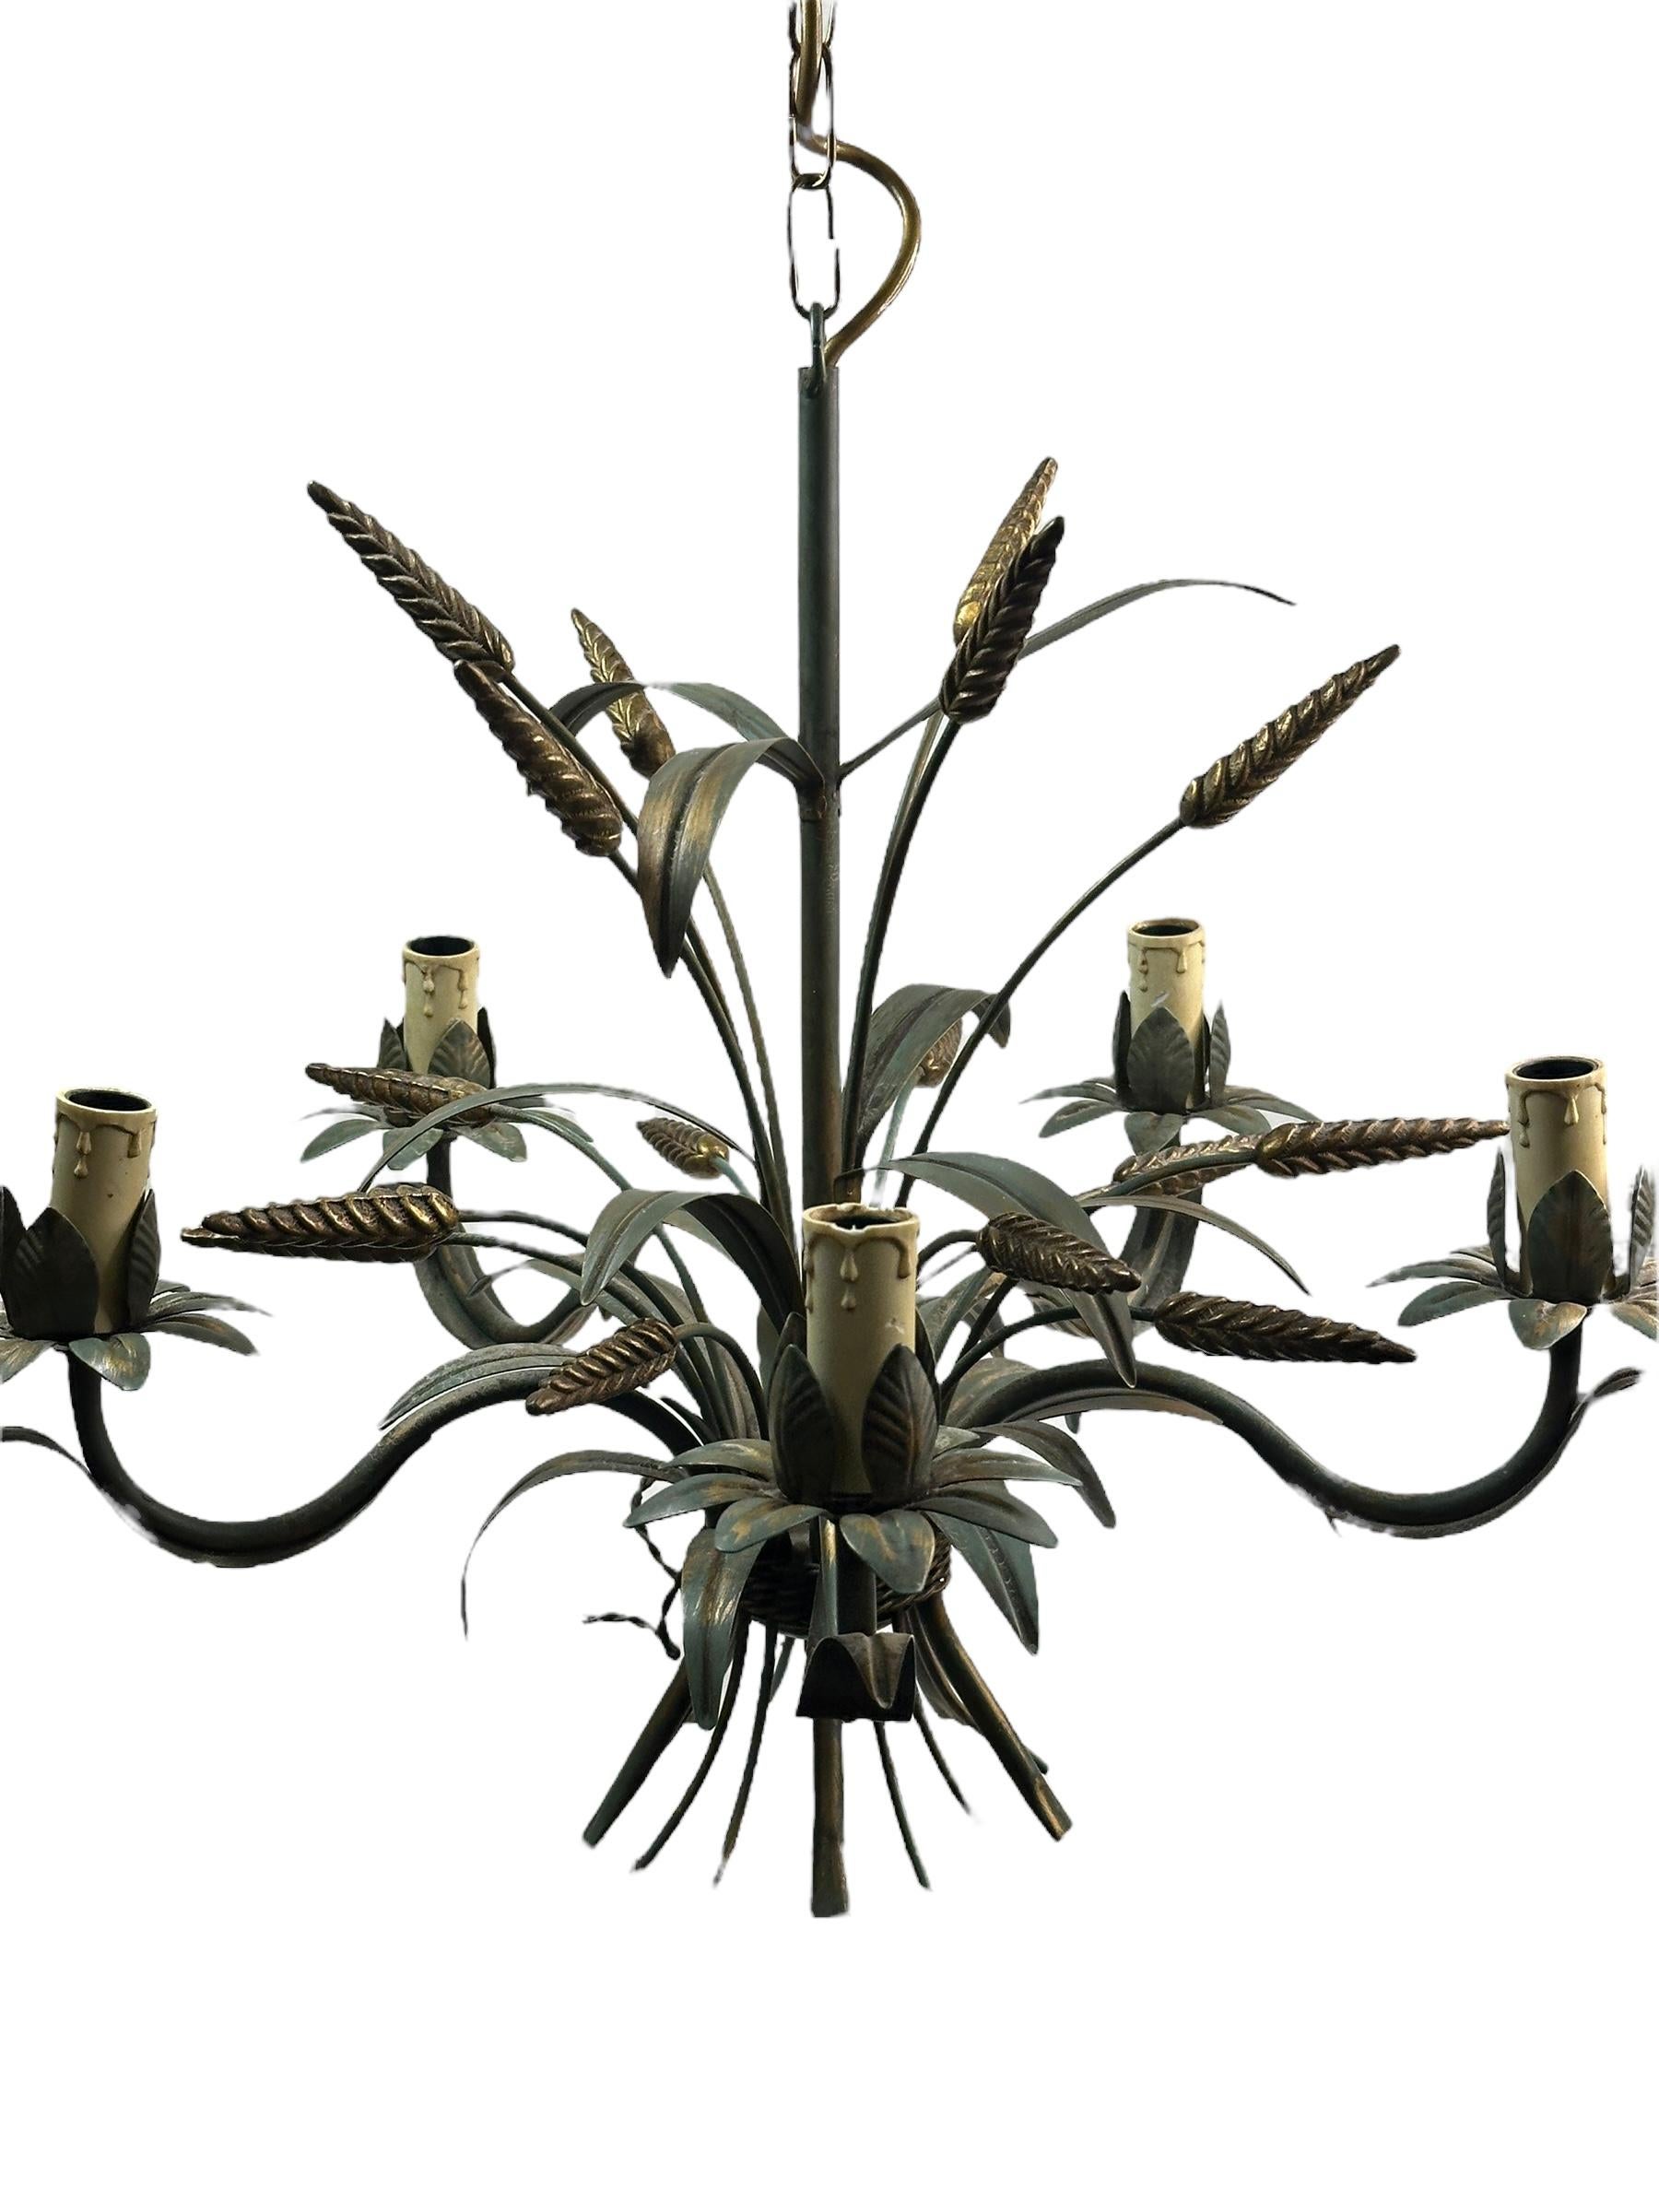 A Hollywood Regency midcentury gilt verdigris tole wheat sheaf chandelier in Coco Chanel Style, the fixture requires five European E14 candelabra bulbs, each bulb up to 40 watts. This light has a beautiful patina and gives each room an eclectic